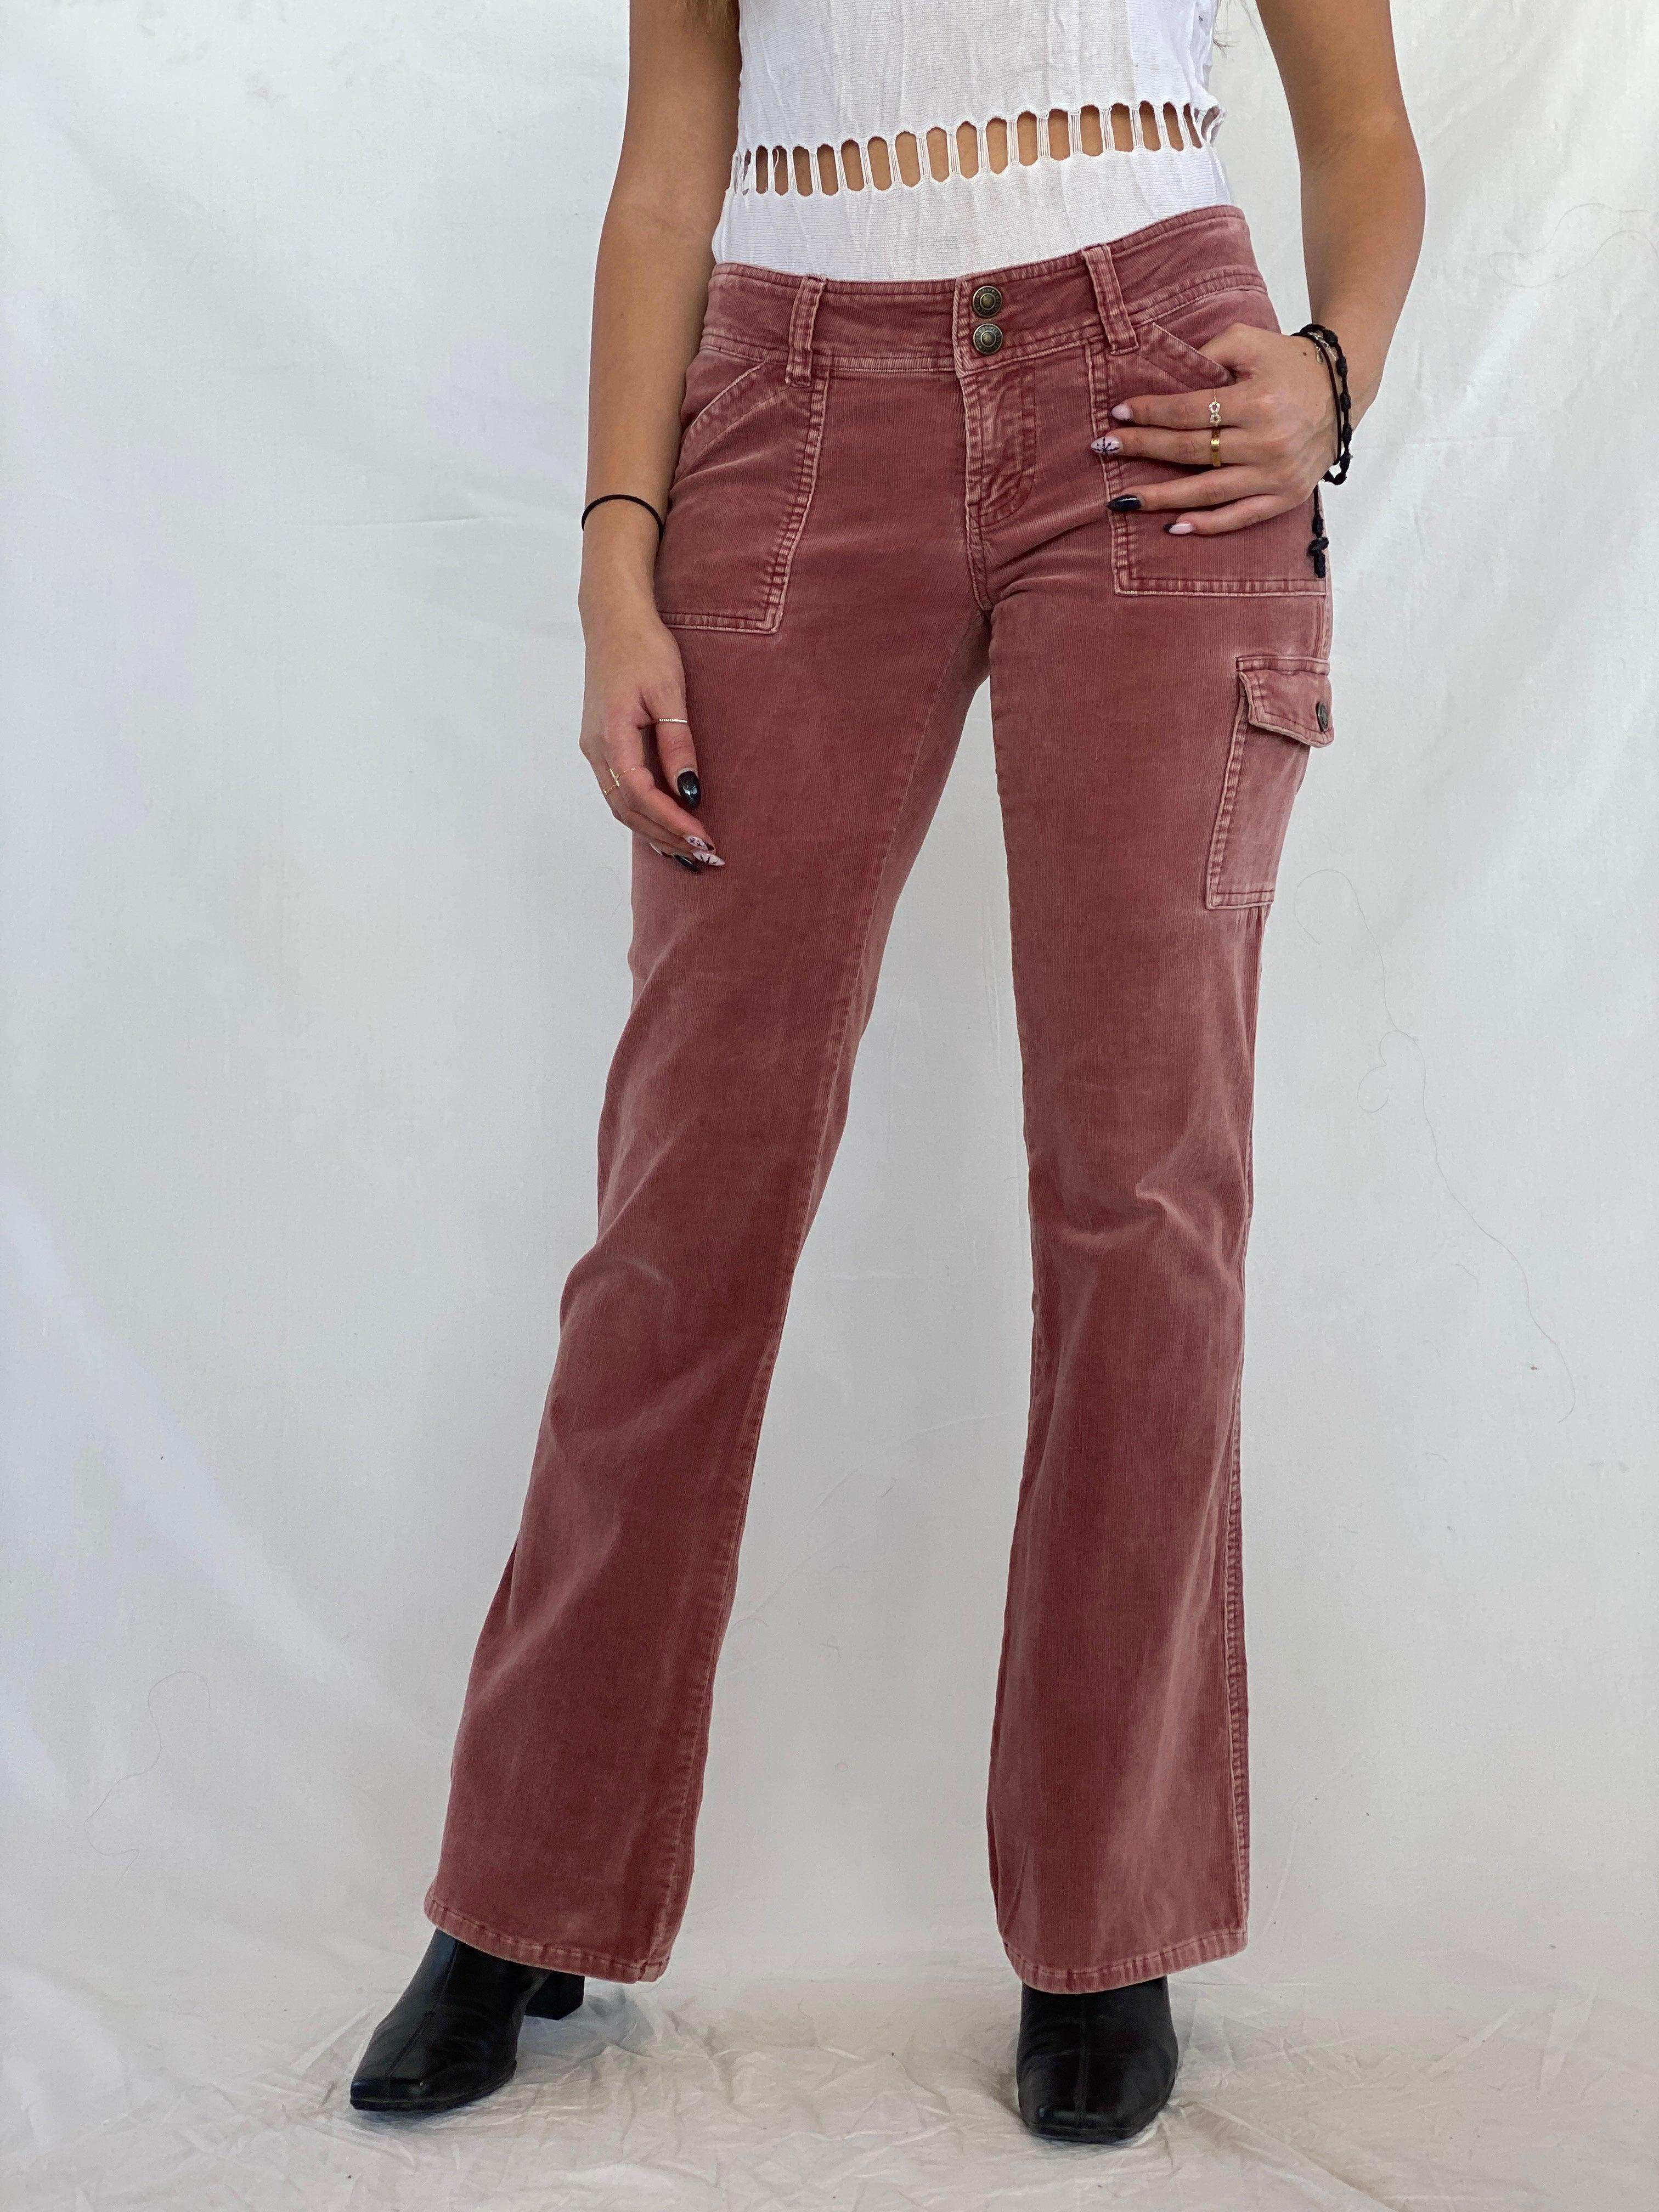 90s/00s Forever 21 Low Rise Flare Corduroy Pants - Balagan Vintage Corduroy Pants 00s, 90s, corduroy, corduroy pants, Juana, NEW IN